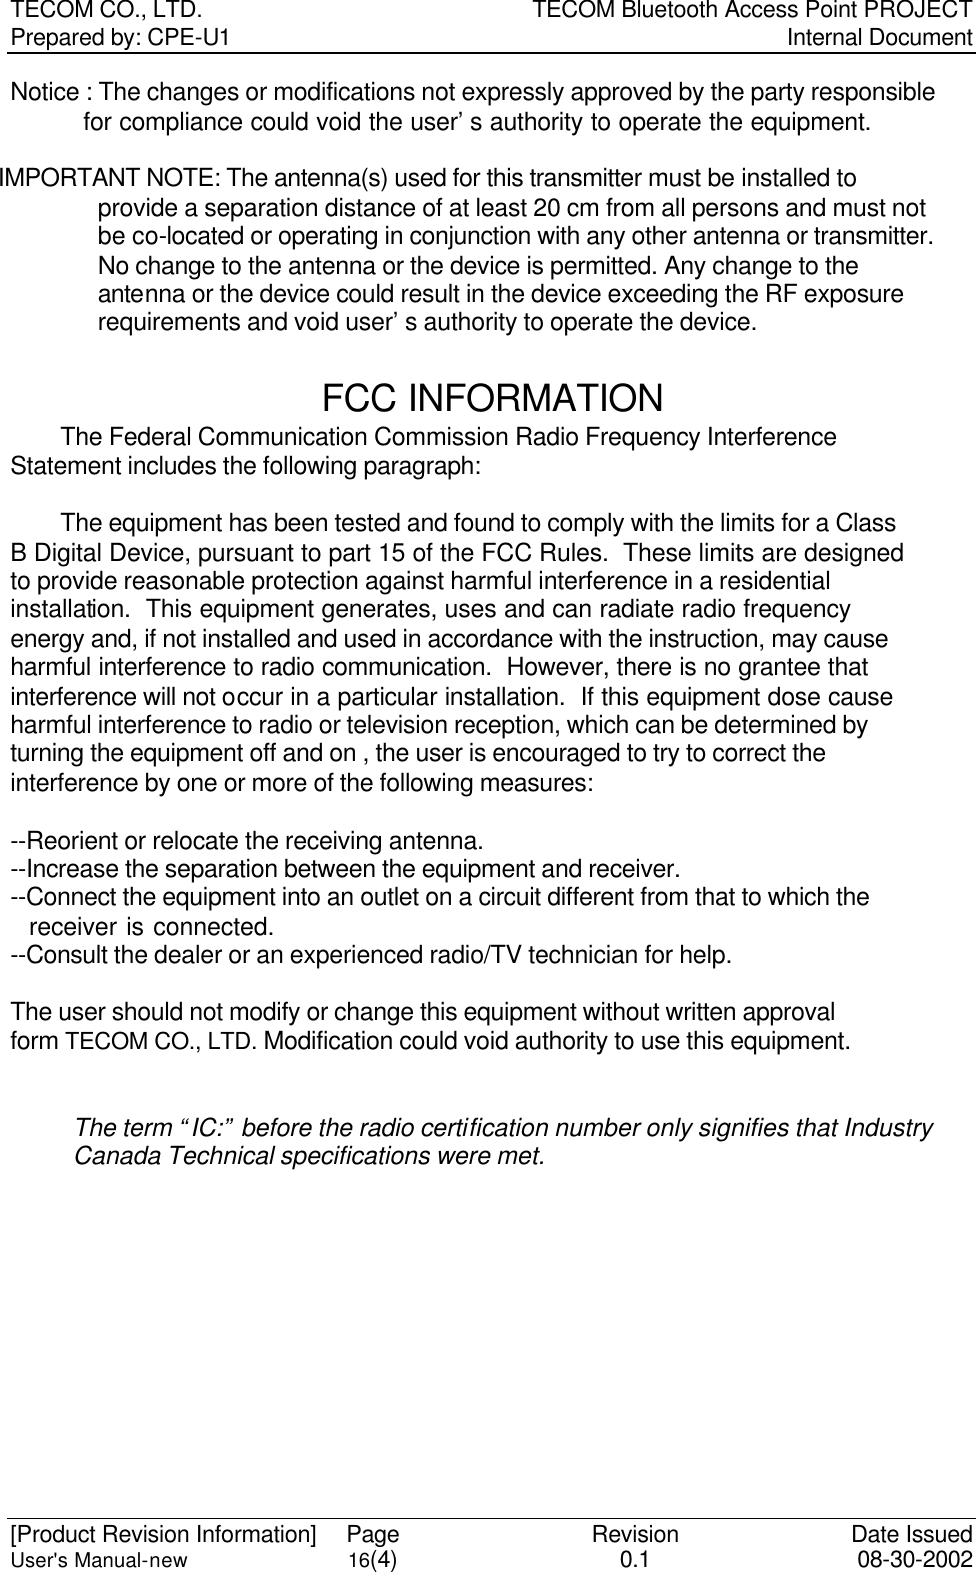 TECOM CO., LTD. TECOM Bluetooth Access Point PROJECT Prepared by: CPE-U1   Internal Document  [Product Revision Information] Page Revision Date Issued User&apos;s Manual-new 16(4) 0.1 08-30-2002 Notice : The changes or modifications not expressly approved by the party responsible     for compliance could void the user’s authority to operate the equipment.  IMPORTANT NOTE: The antenna(s) used for this transmitter must be installed to provide a separation distance of at least 20 cm from all persons and must not be co-located or operating in conjunction with any other antenna or transmitter. No change to the antenna or the device is permitted. Any change to the antenna or the device could result in the device exceeding the RF exposure requirements and void user’s authority to operate the device.  FCC INFORMATION  The Federal Communication Commission Radio Frequency Interference Statement includes the following paragraph:   The equipment has been tested and found to comply with the limits for a Class B Digital Device, pursuant to part 15 of the FCC Rules.  These limits are designed to provide reasonable protection against harmful interference in a residential installation.  This equipment generates, uses and can radiate radio frequency energy and, if not installed and used in accordance with the instruction, may cause harmful interference to radio communication.  However, there is no grantee that interference will not occur in a particular installation.  If this equipment dose cause harmful interference to radio or television reception, which can be determined by   turning the equipment off and on , the user is encouraged to try to correct the   interference by one or more of the following measures:  --Reorient or relocate the receiving antenna. --Increase the separation between the equipment and receiver. --Connect the equipment into an outlet on a circuit different from that to which the     receiver is connected. --Consult the dealer or an experienced radio/TV technician for help.  The user should not modify or change this equipment without written approval form TECOM CO., LTD. Modification could void authority to use this equipment.   The term “IC:” before the radio certification number only signifies that Industry Canada Technical specifications were met.  